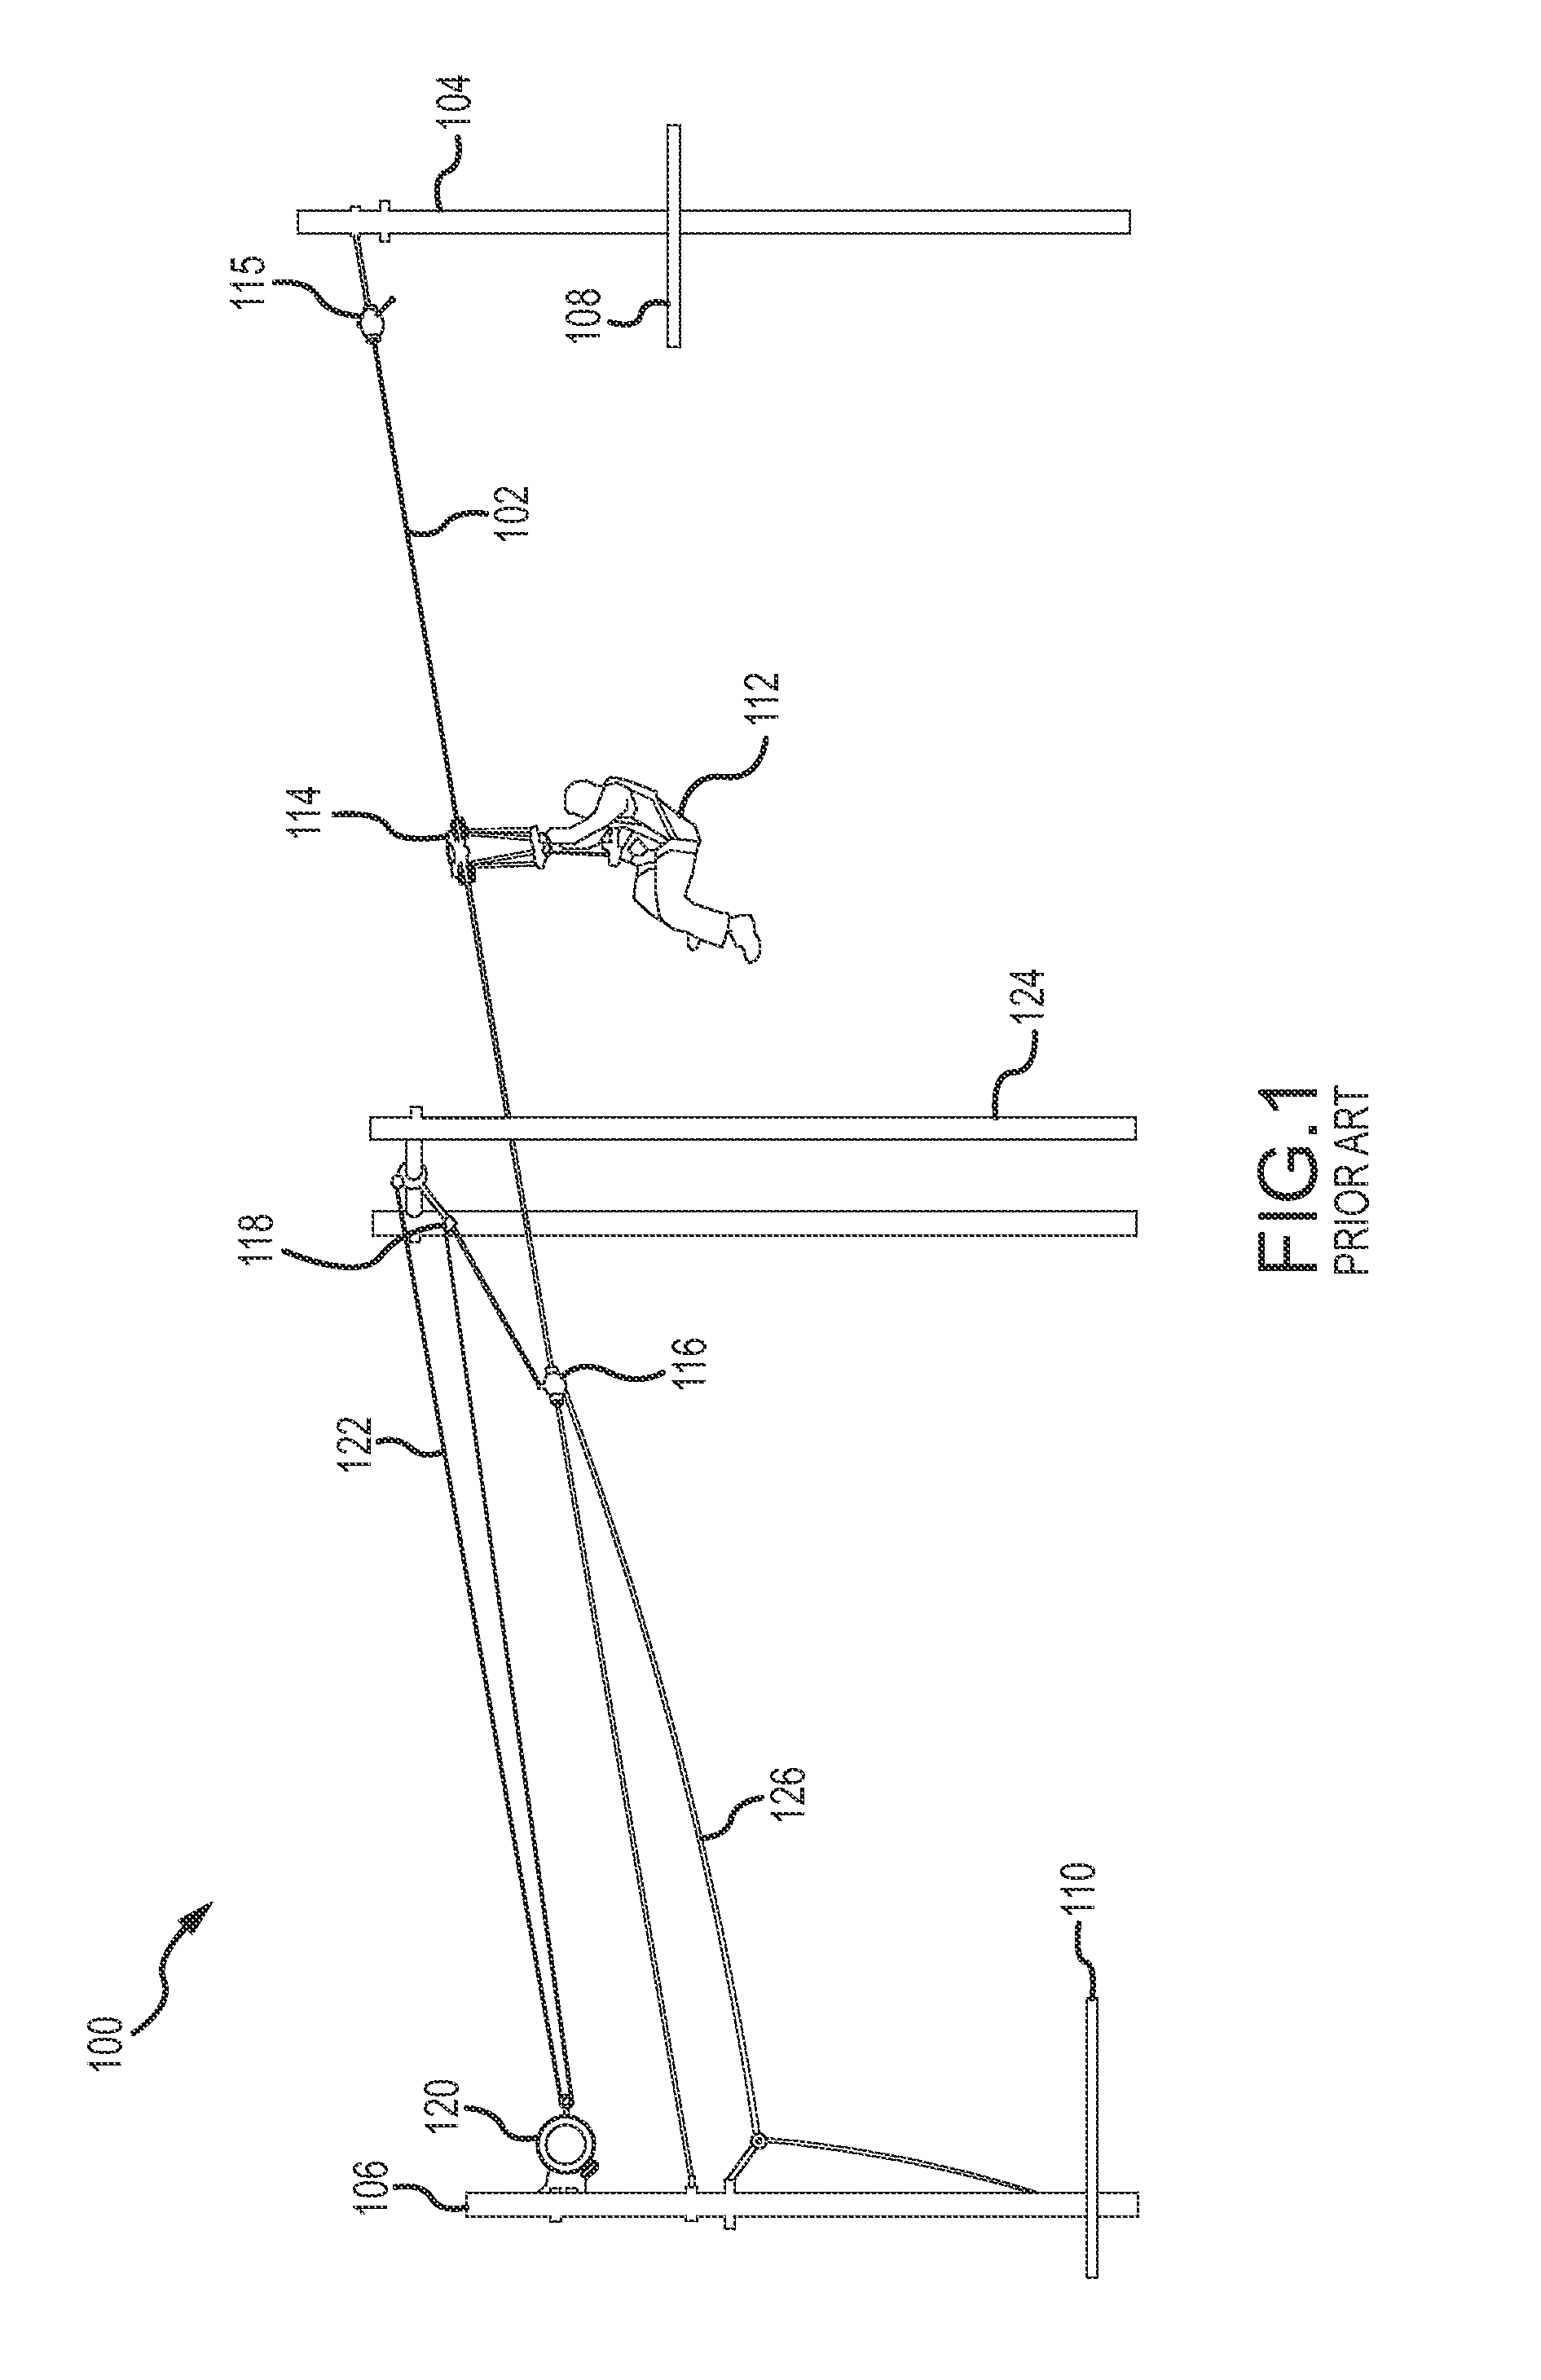 Cable-traversing trolley adapted for use with impact braking